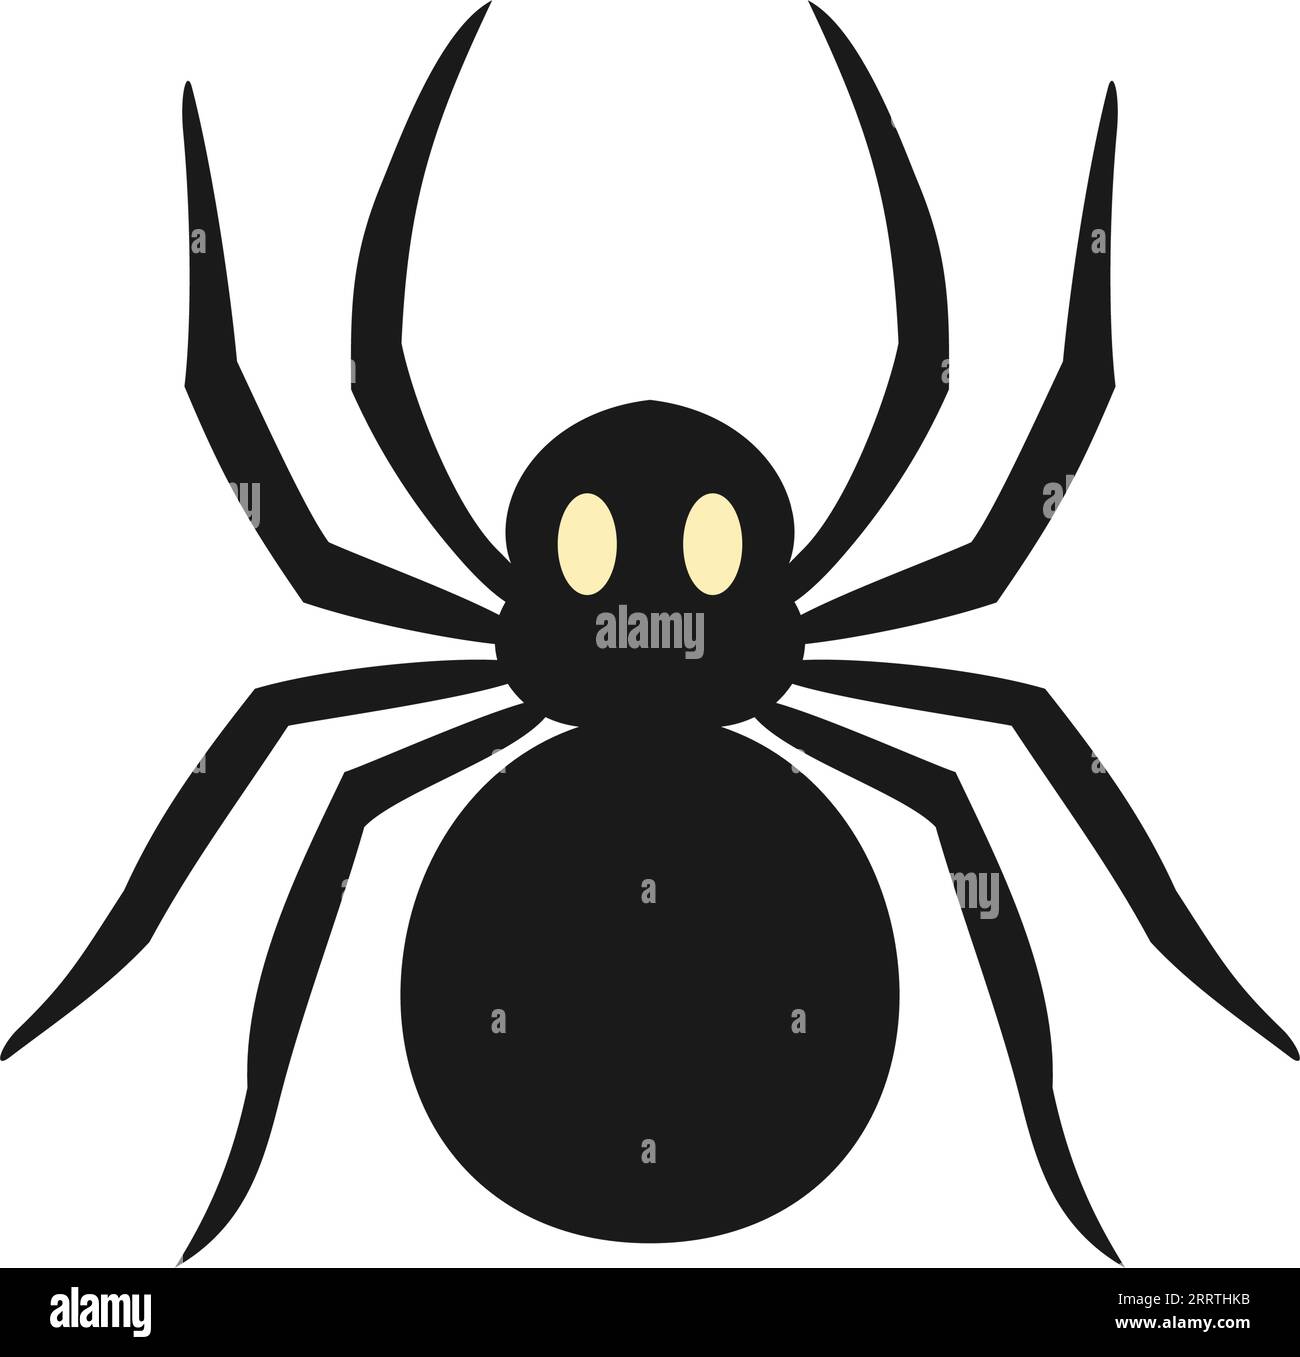 A black spider with yellow eyes on a white background. Spider silhouette. Insect flat design. Vector isolated illustration. Stock Vector